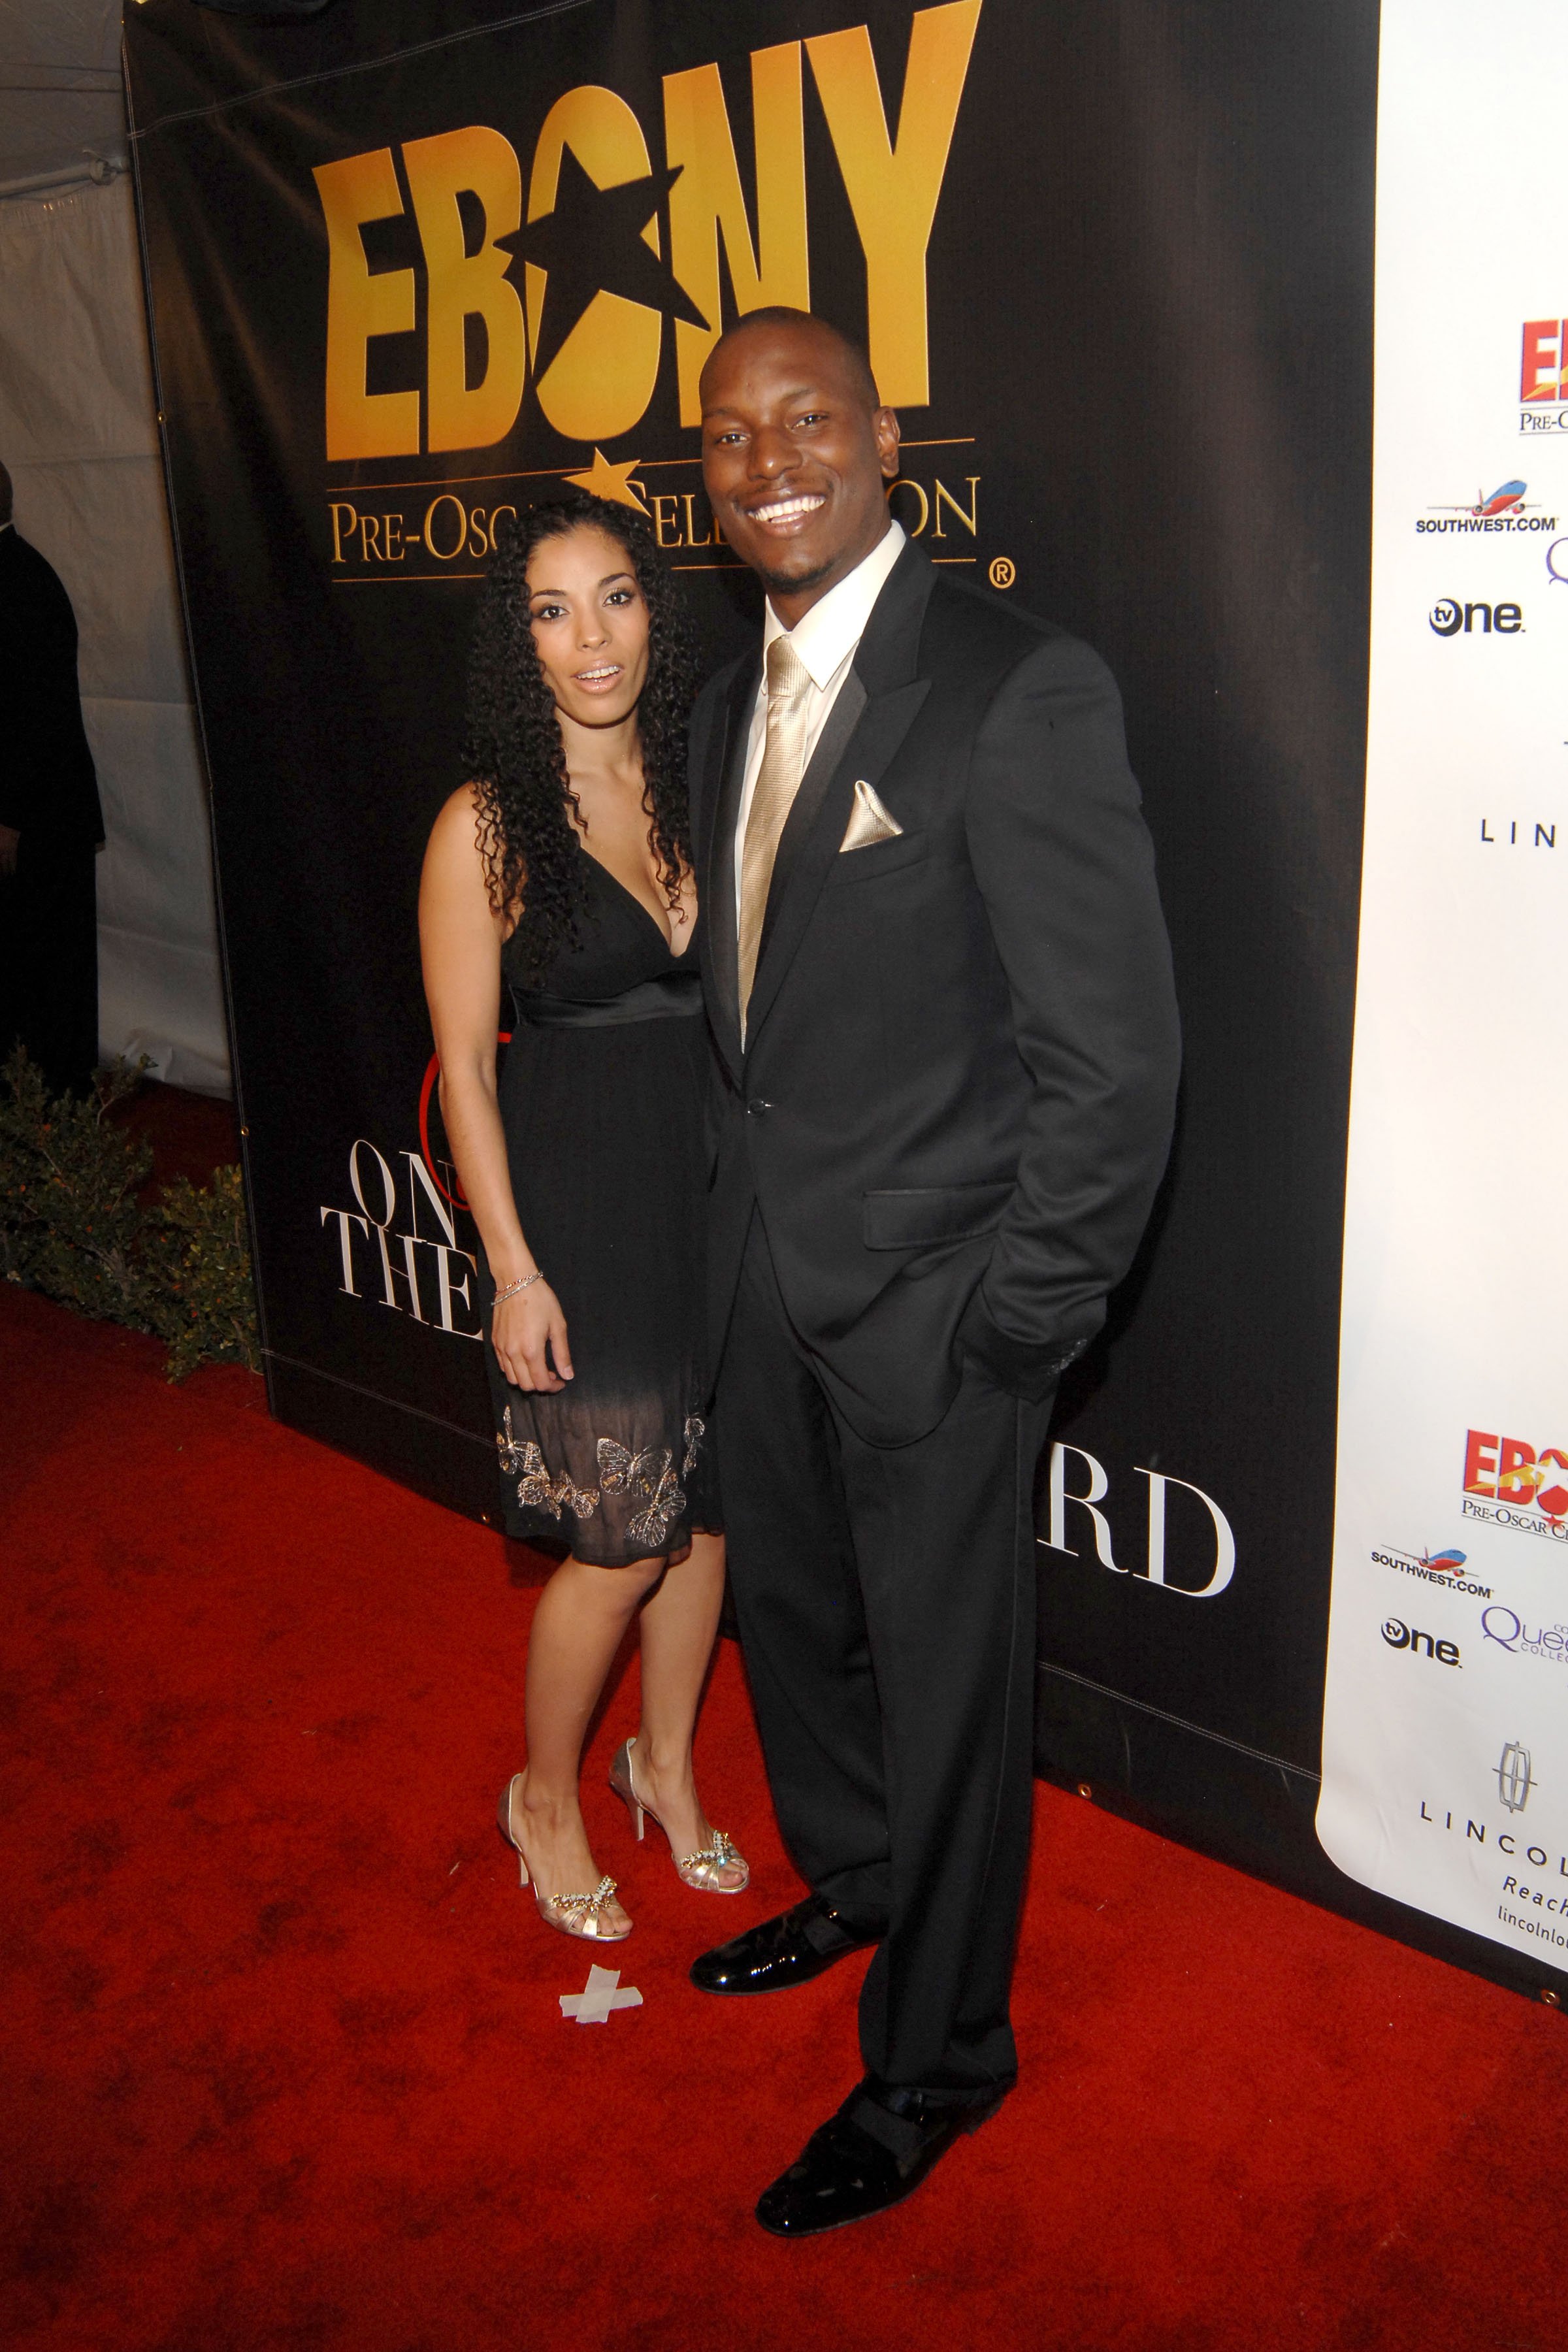 Norma and Tyrese Gibson pose at the EBONY Magazine Pre Oscar Celebration on February 21, 2008, at Boulevard 3 | Source: Getty Images